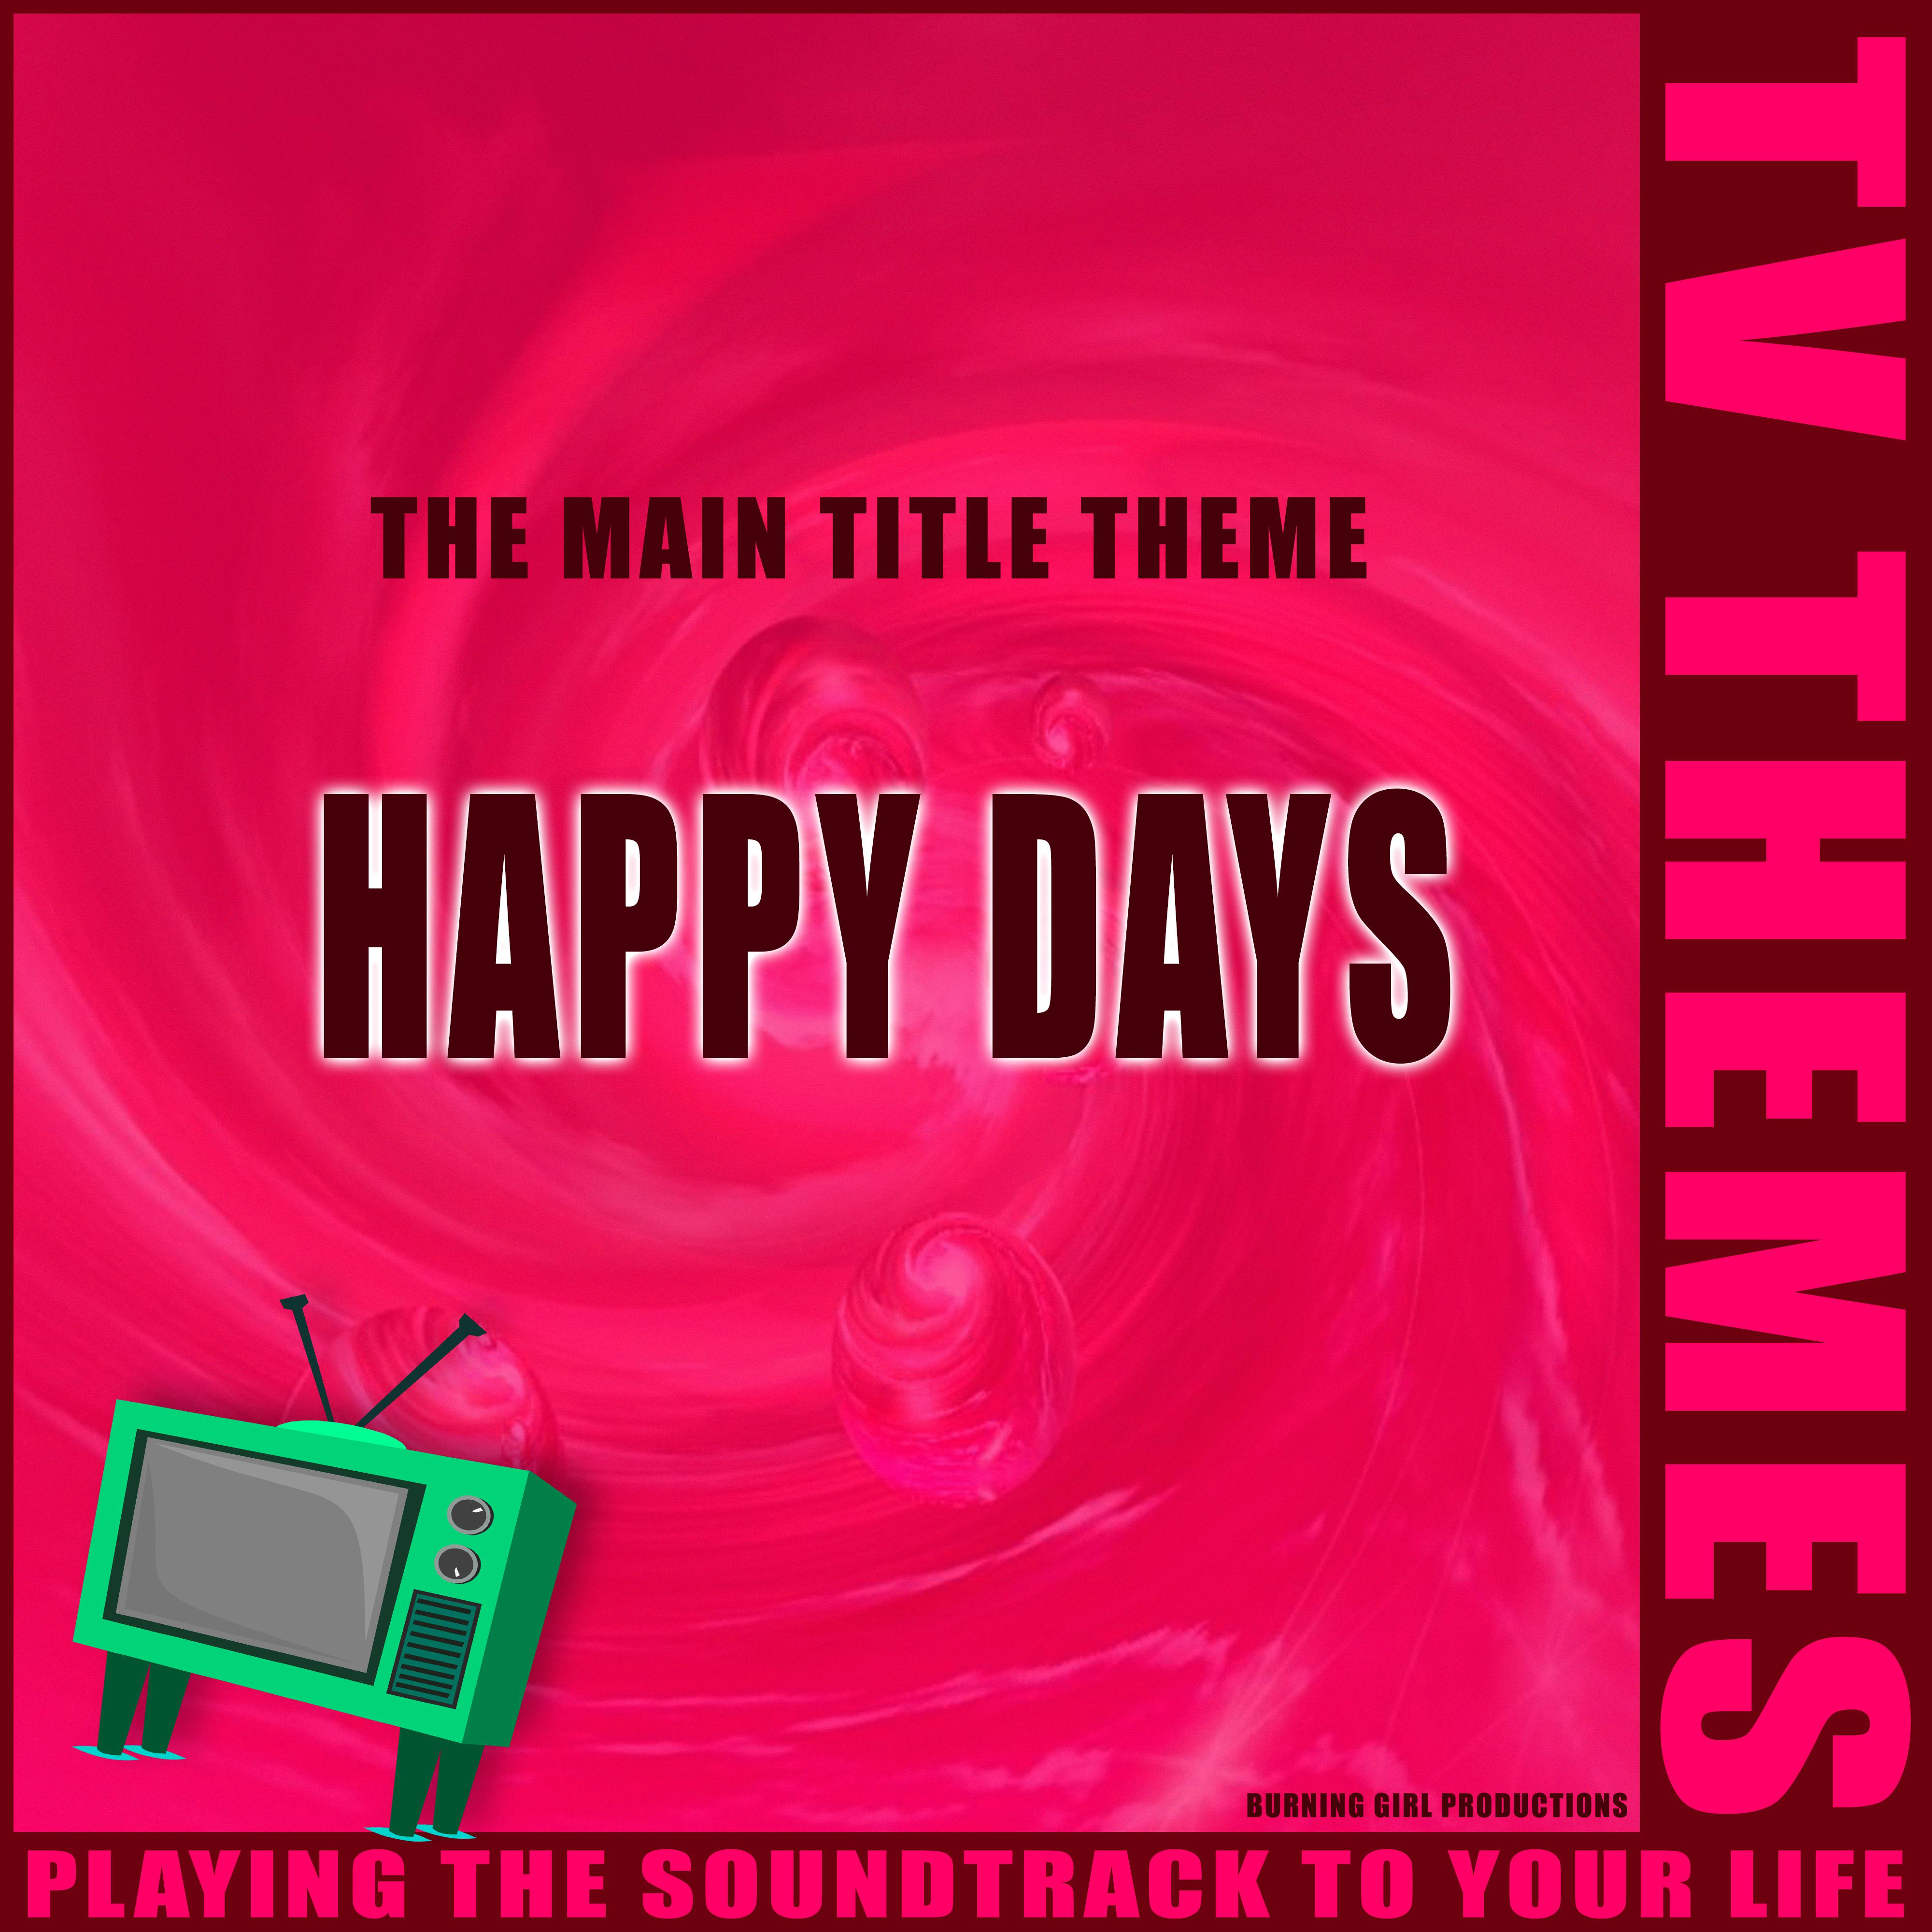 The Main Title Theme - Happy Days